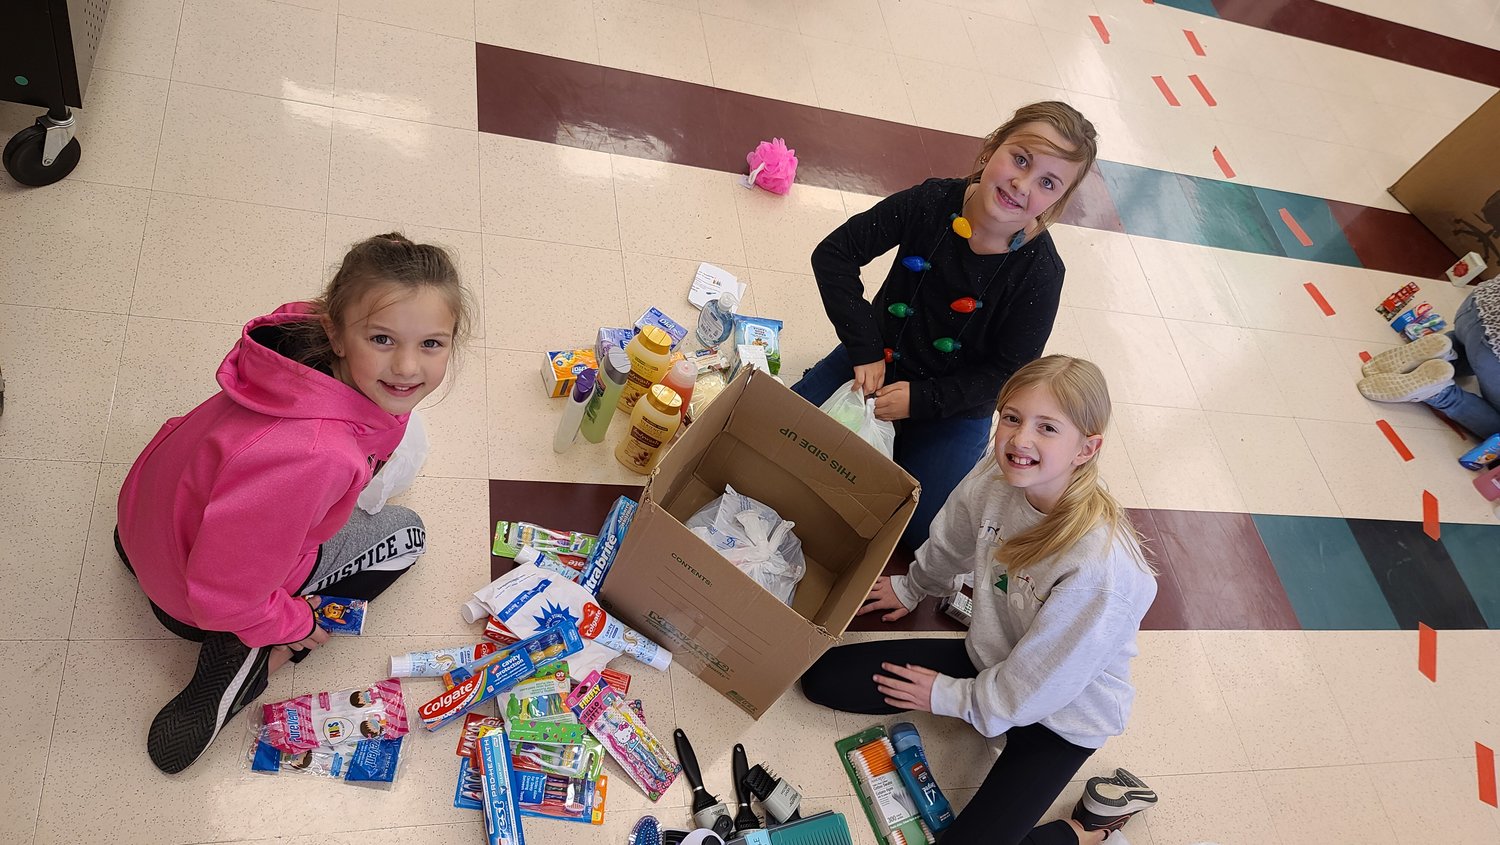 IN DECEMBER, students on the Campus Union Board at North Elementary donated hygiene items, like toothbrushes and toothpaste, deodorant, soap and shampoo, to Care to Learn.